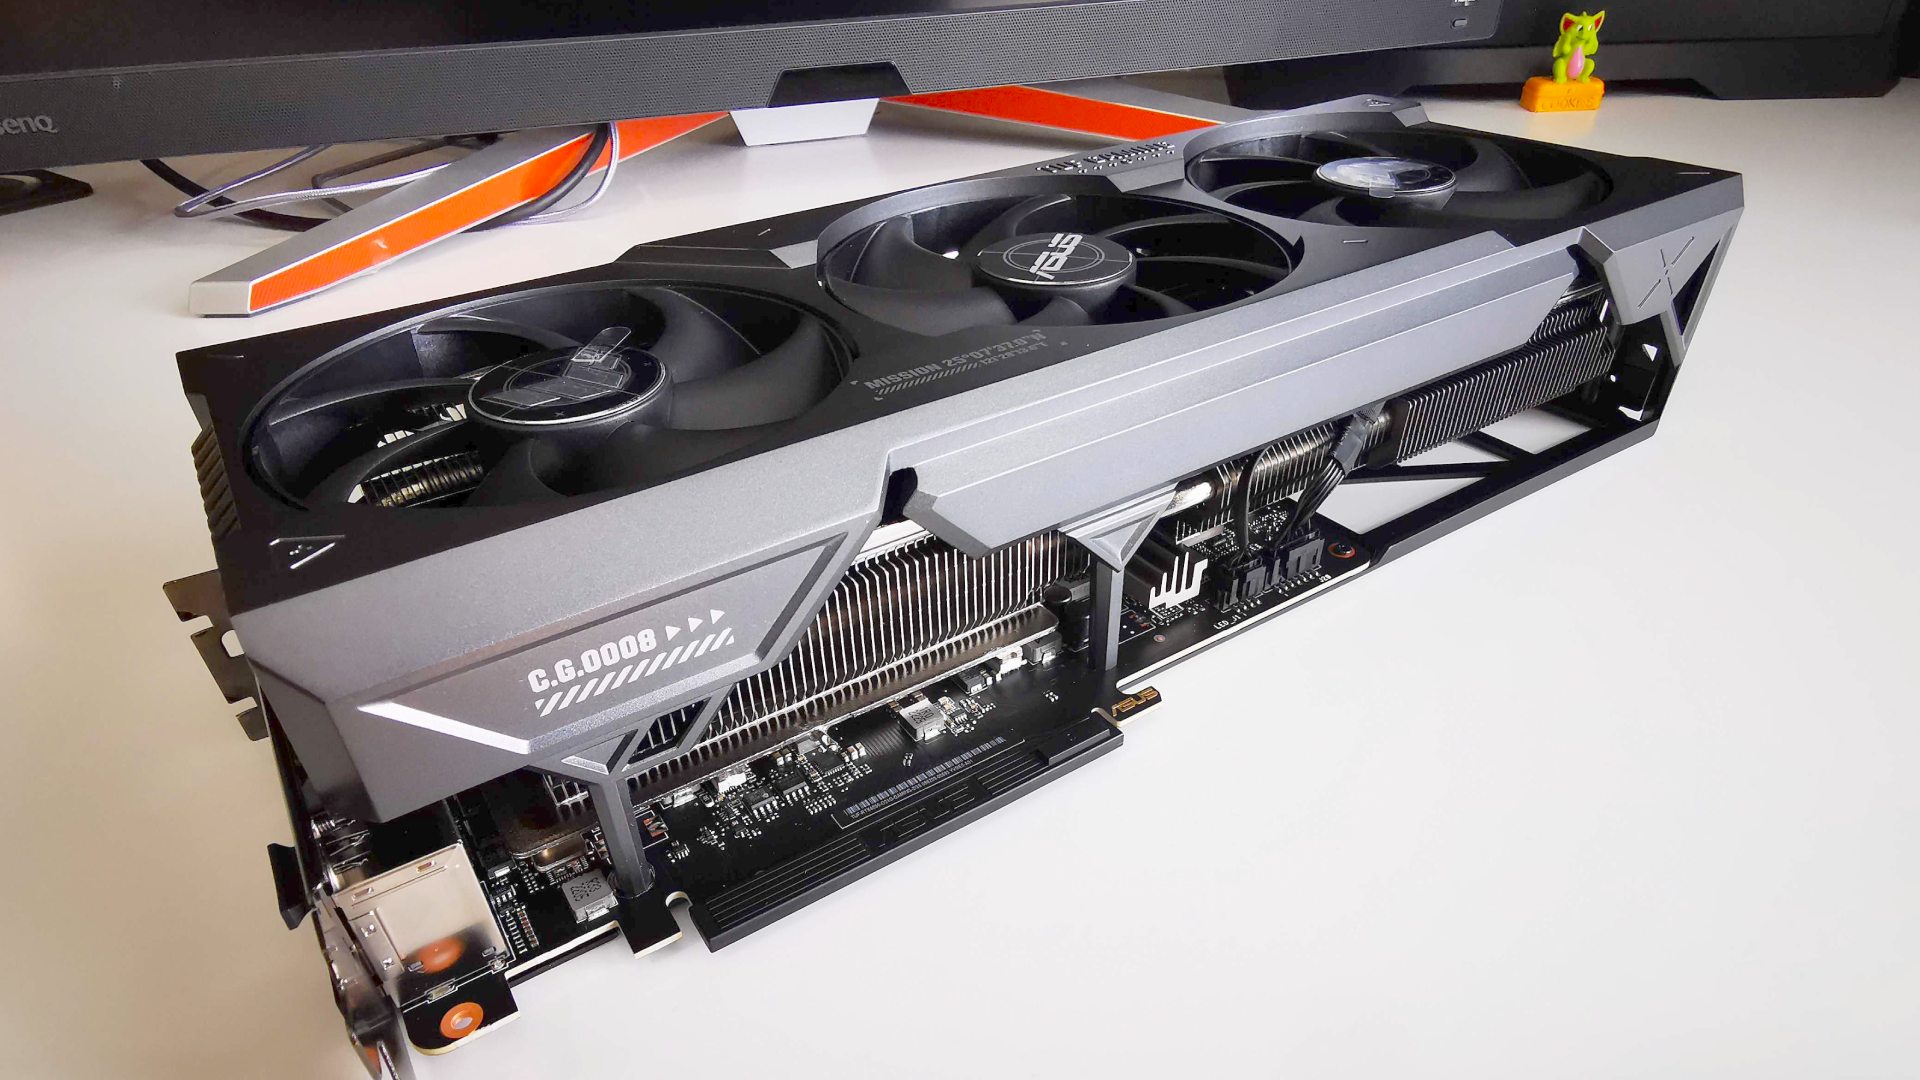 Nvidia RTX 4090 Asus TUF gaming graphics card lying on desk